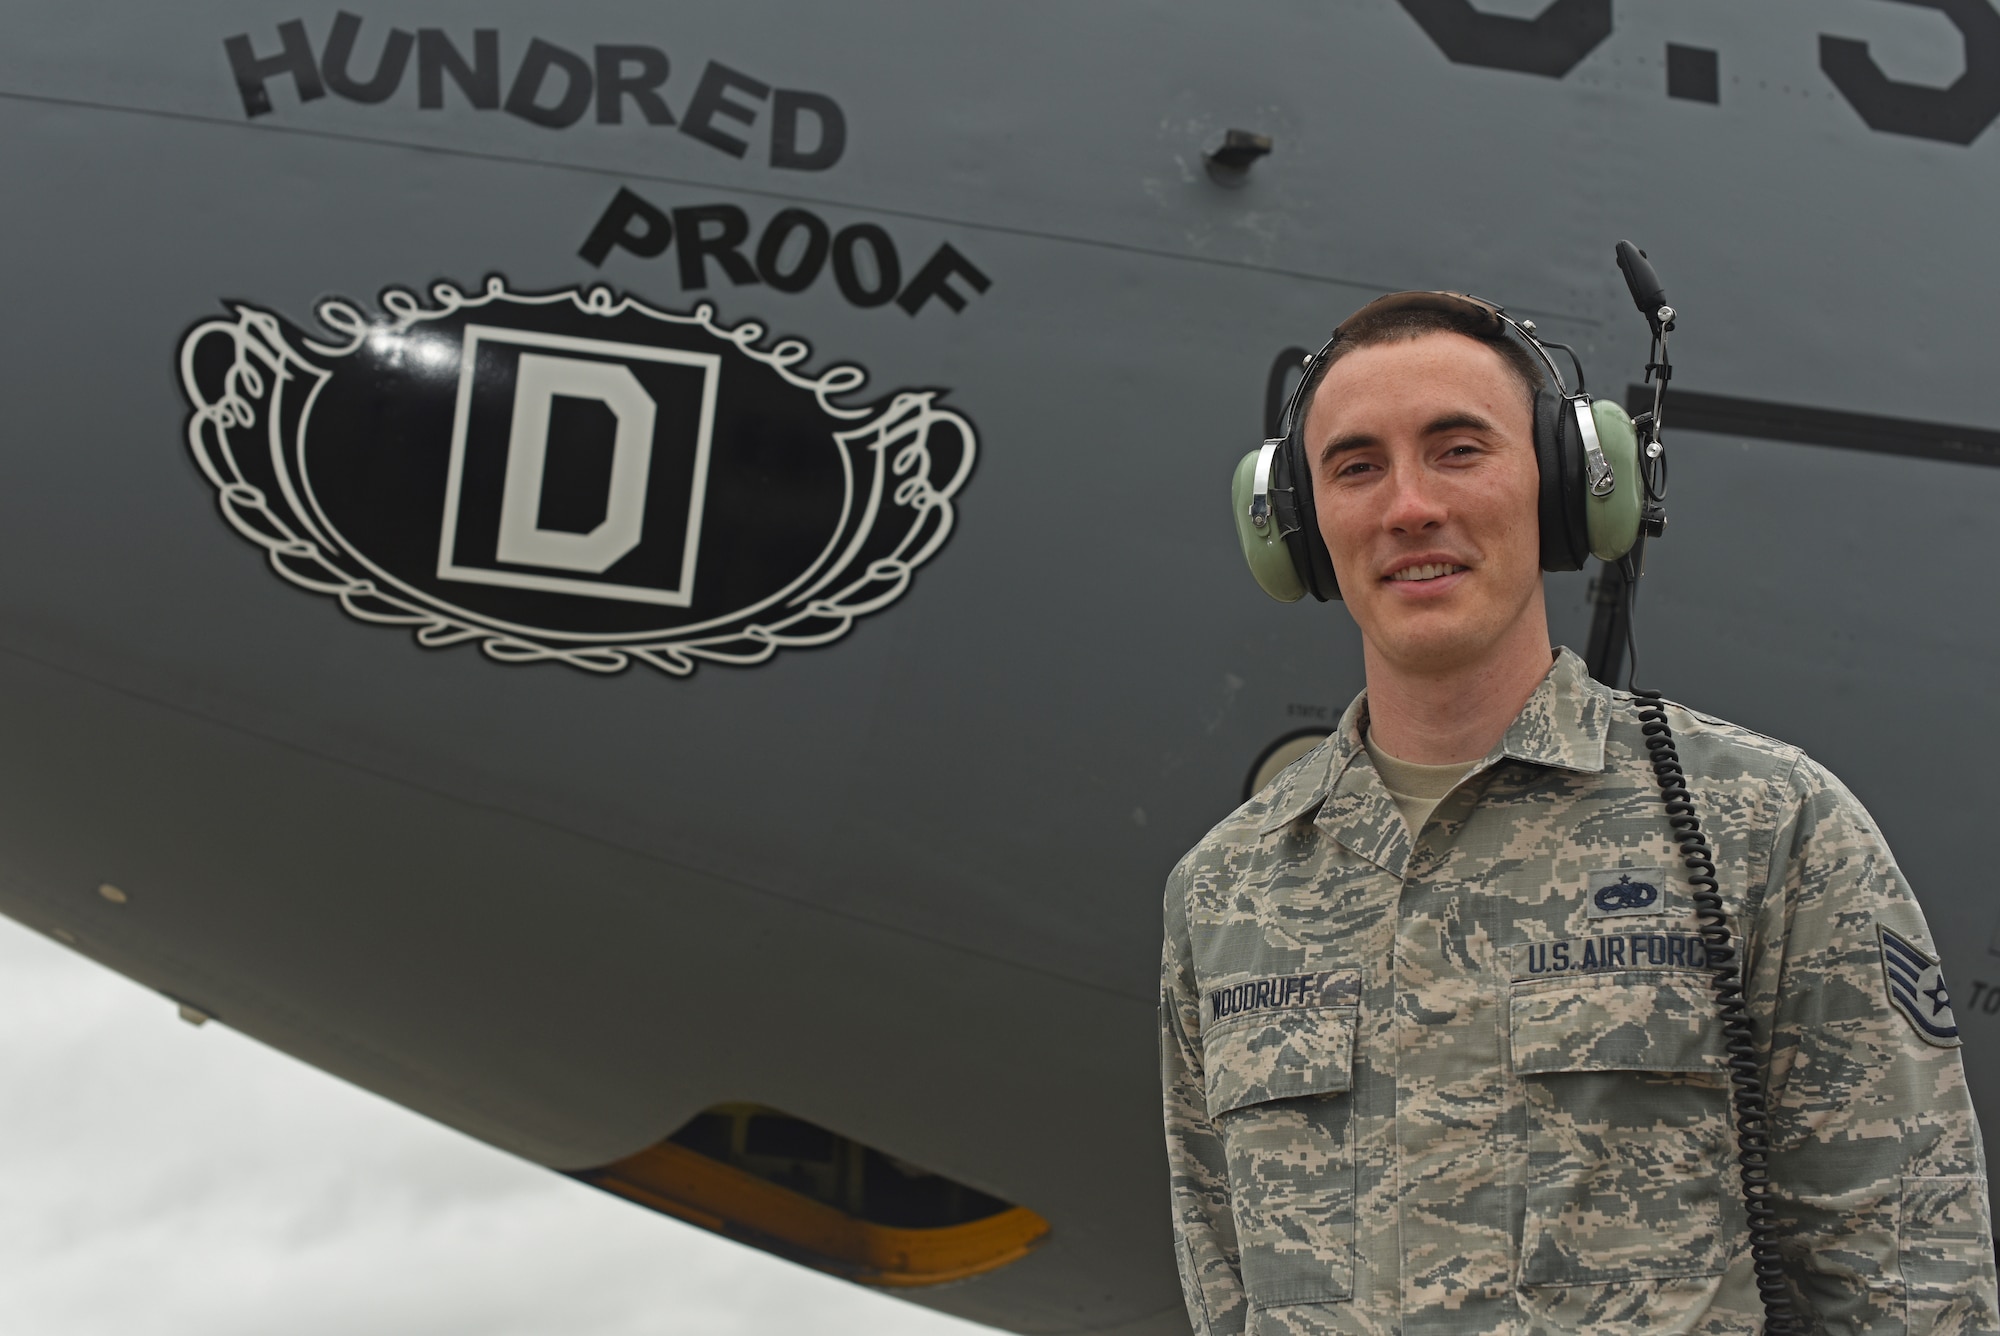 U.S. Air Force Staff Sgt. Trevor Woodruff, 100th Aircraft Maintenance Squadron flying crew chief and instrument and flight controls systems craftsman, poses for a photo with the 100th Air Refueling Wing KC-135 Stratotanker “Hundred Proof” at RAF Mildenhall, England, Feb. 8, 2019. Flying and Dedicated crew chiefs supervise pre- and post-flight actions, conduct inspections, take care of delayed and pilot-reported discrepancies and perform routine maintenance. (U.S. Air Force photo by Airman 1st Class Brandon Esau)